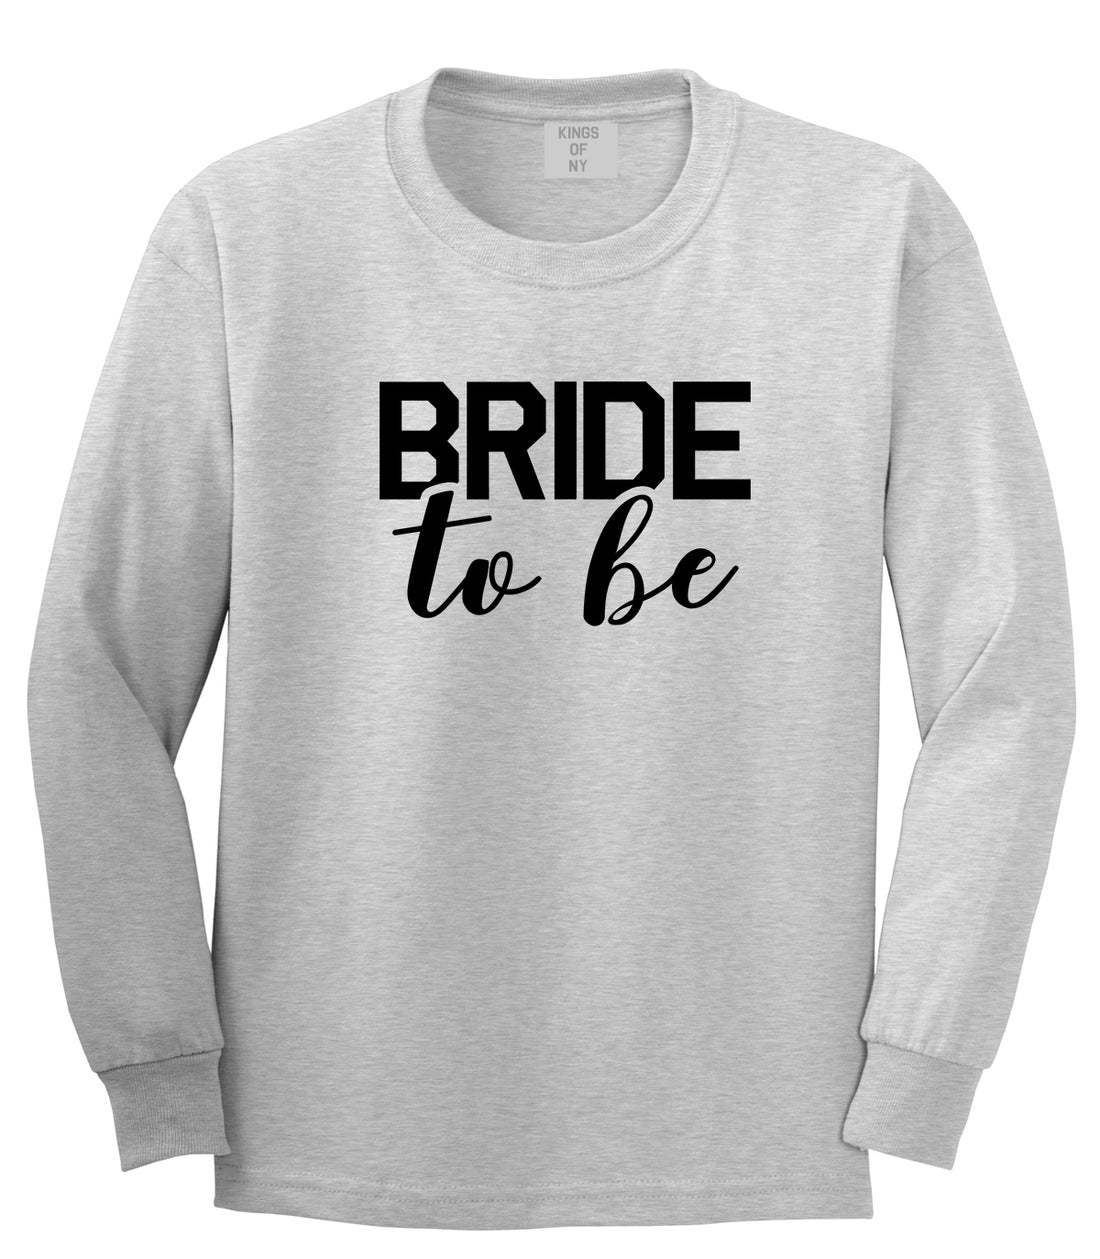 Bride To Be Grey Long Sleeve T-Shirt by Kings Of NY